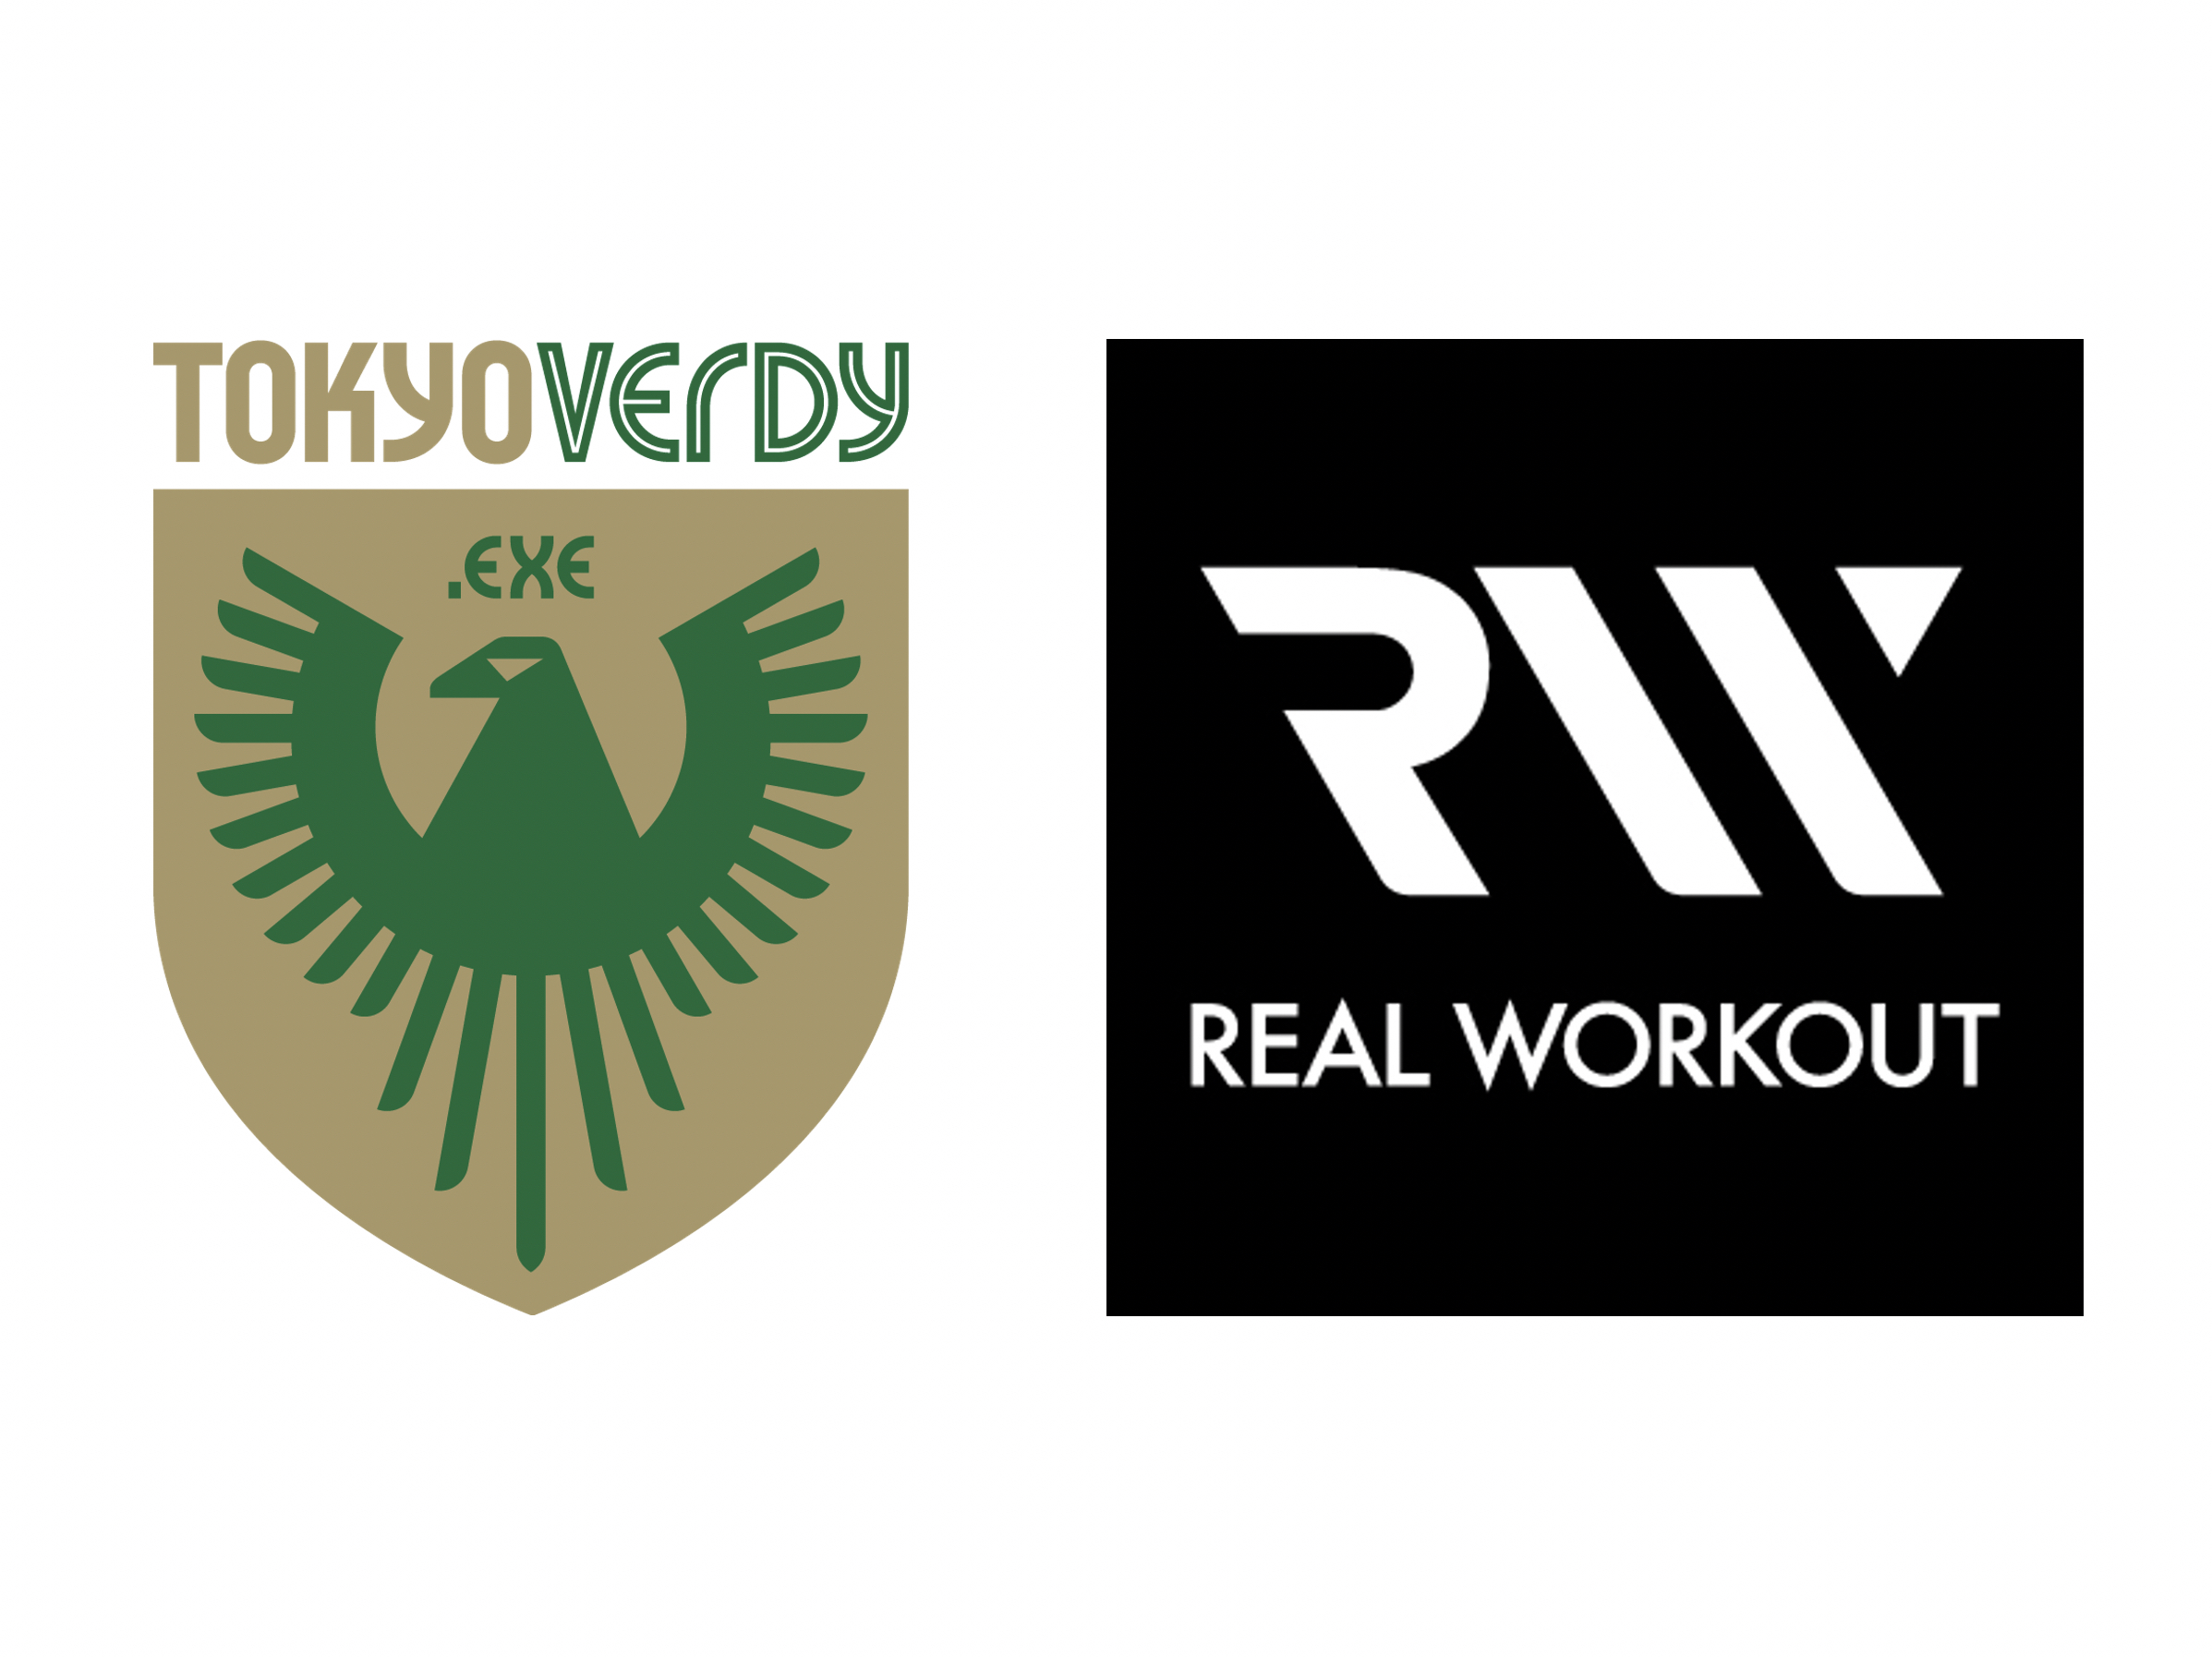 Personal Gym Real Workout Signs Official Sponsorship Contract With 3x3 Exe Premier S Tokyo Verdy 3x3 Basketball Team September 10 21 Archysport